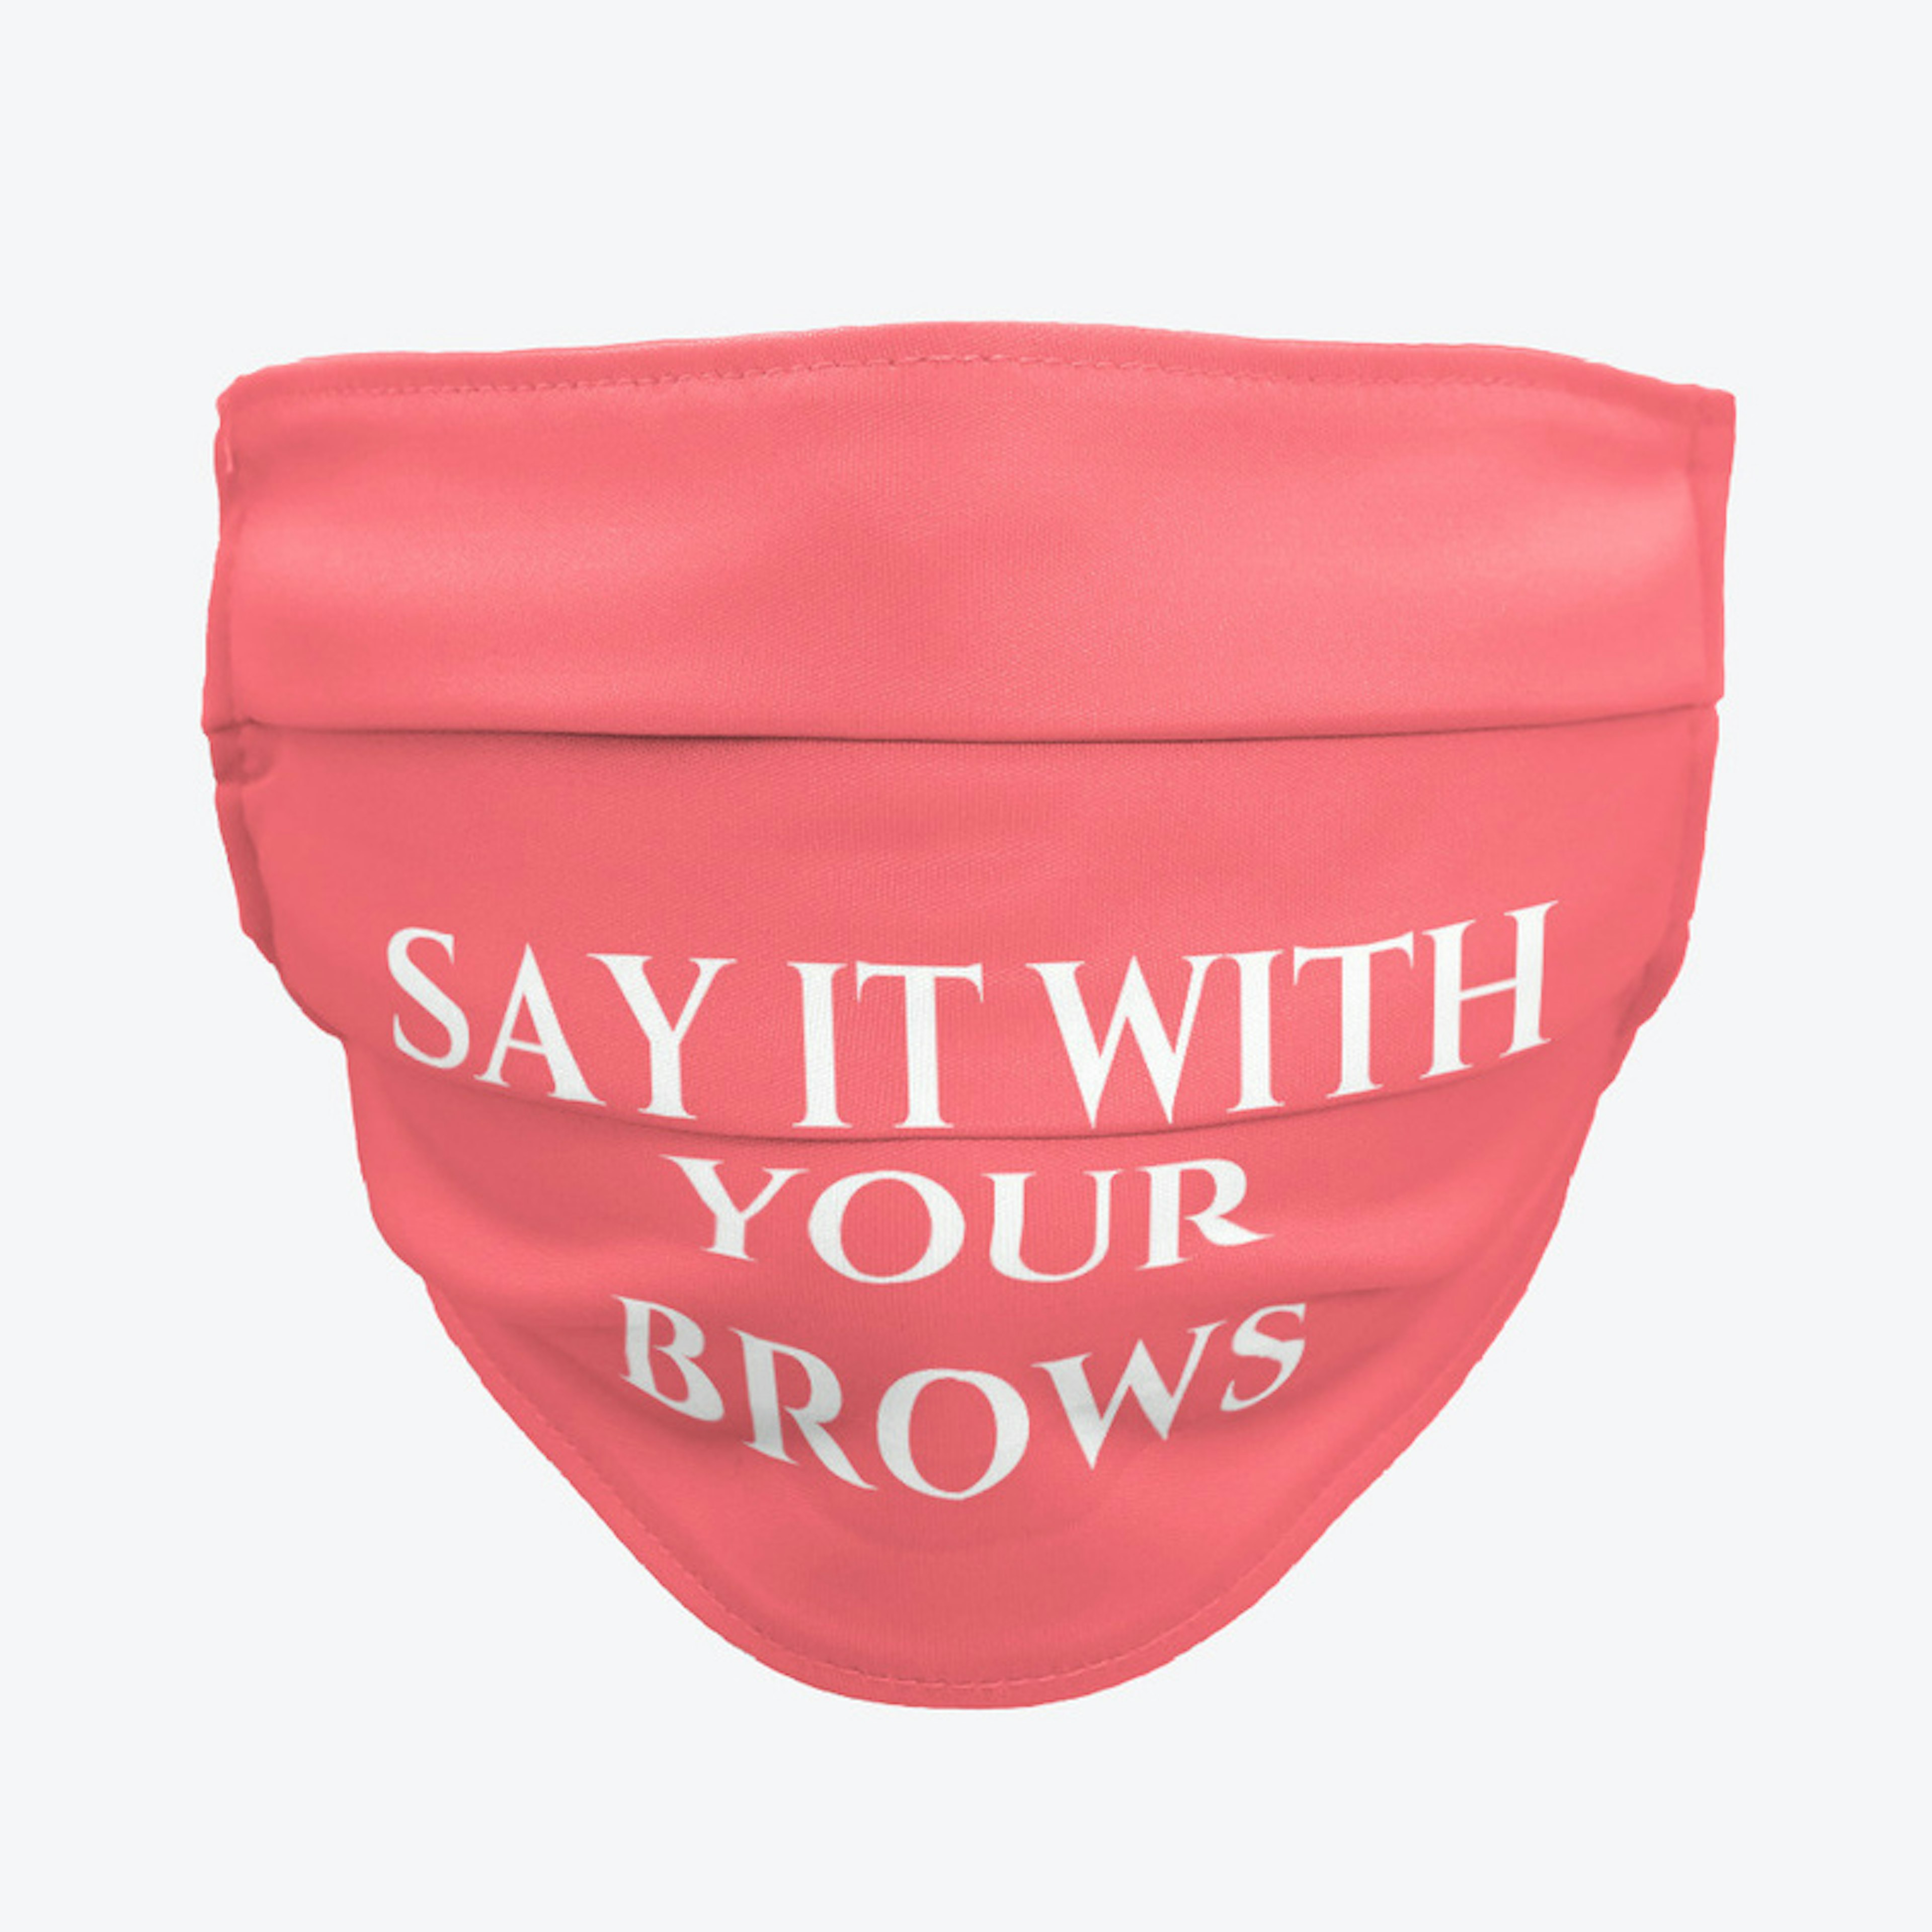 Say It With Your Brows